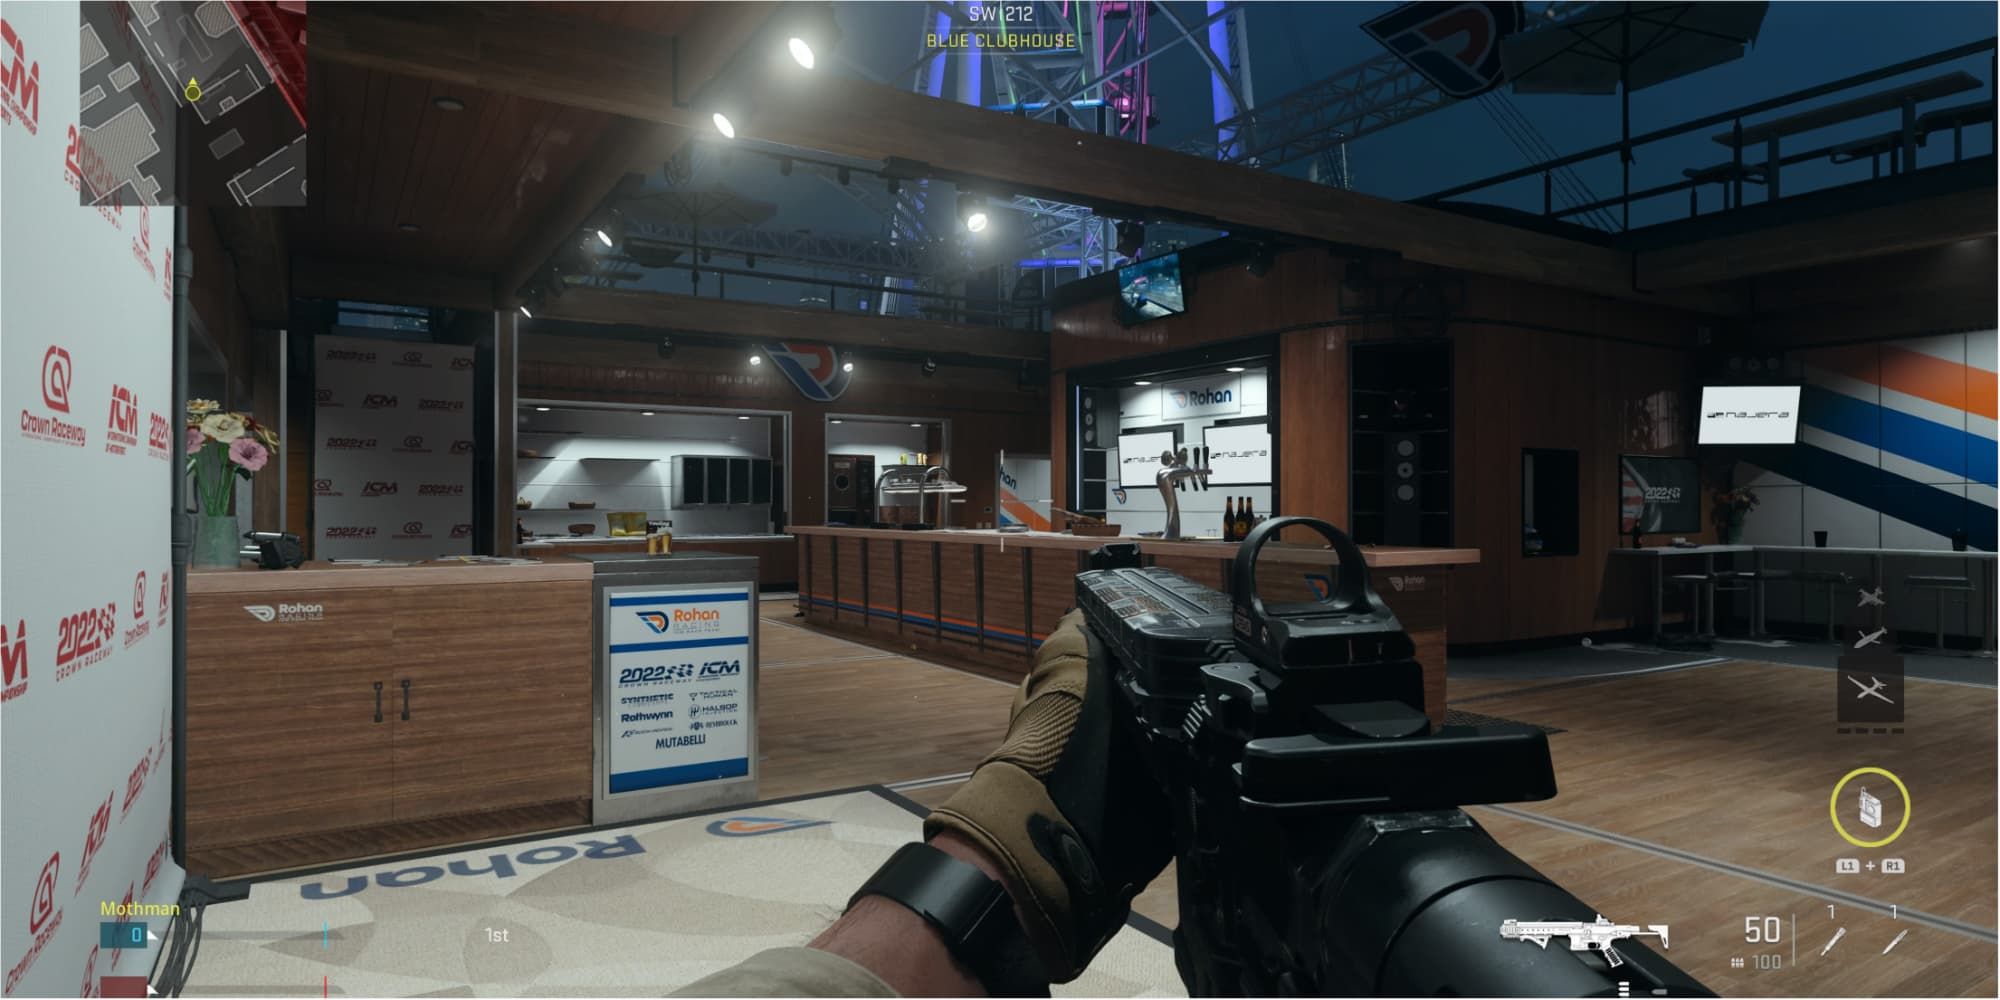 The Crown Raceway Blue Clubhouse location has a bar and other cabinets to give campers cover in Call of Duty: Modern Warfare 2